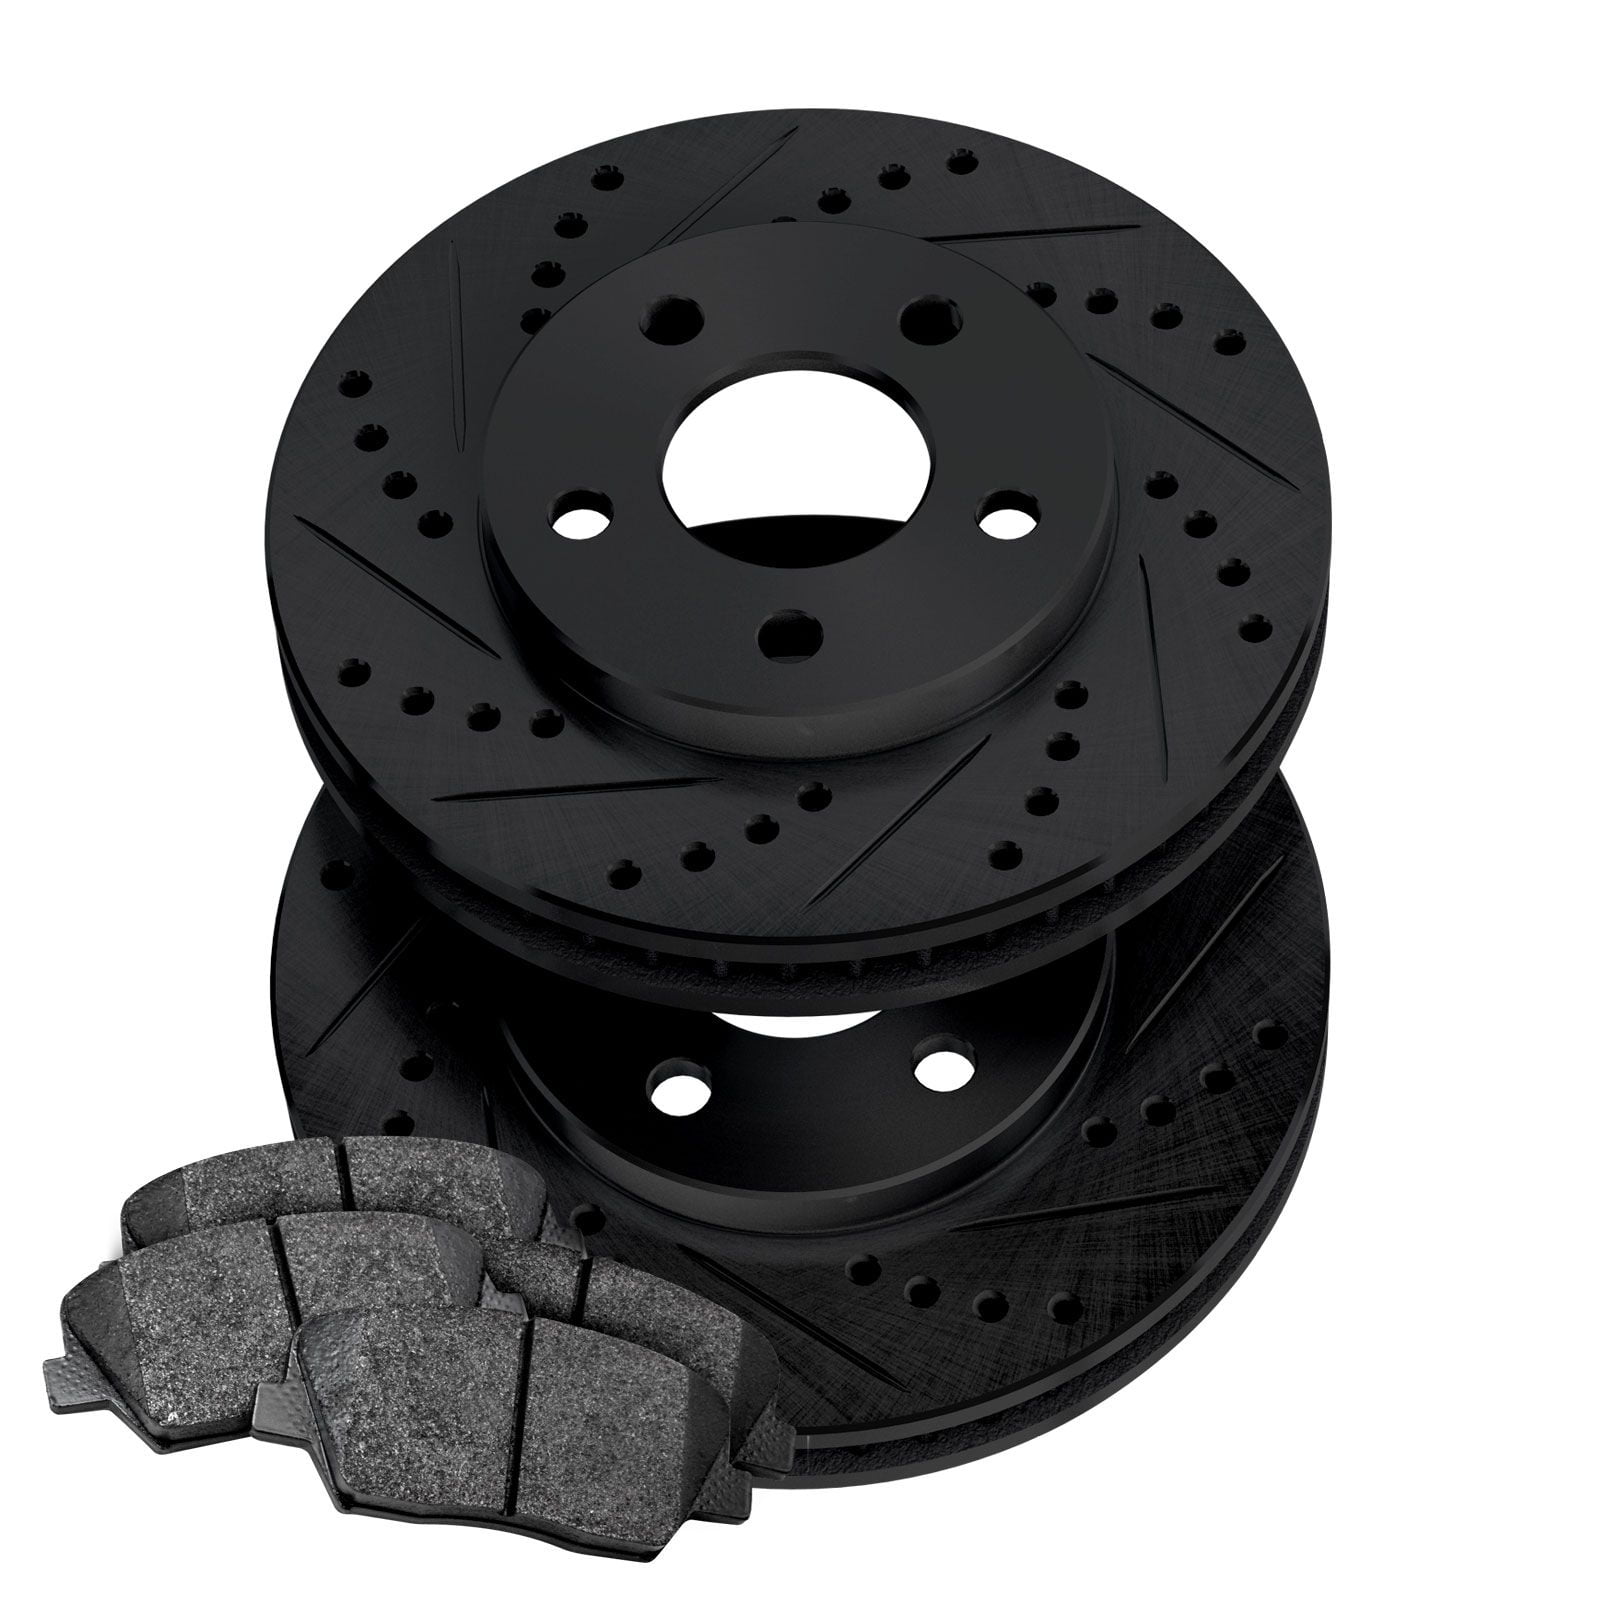 PowerSport Front Brakes and Rotors Kit |Front Brake Pads| Brake Rotors and  Pads| Semi Metallic Brake Pads and Rotors |fits 1999-2001 Jeep Cherokee,  1999-2006 Jeep TJ, 1999-2006 Jeep Wrangler 